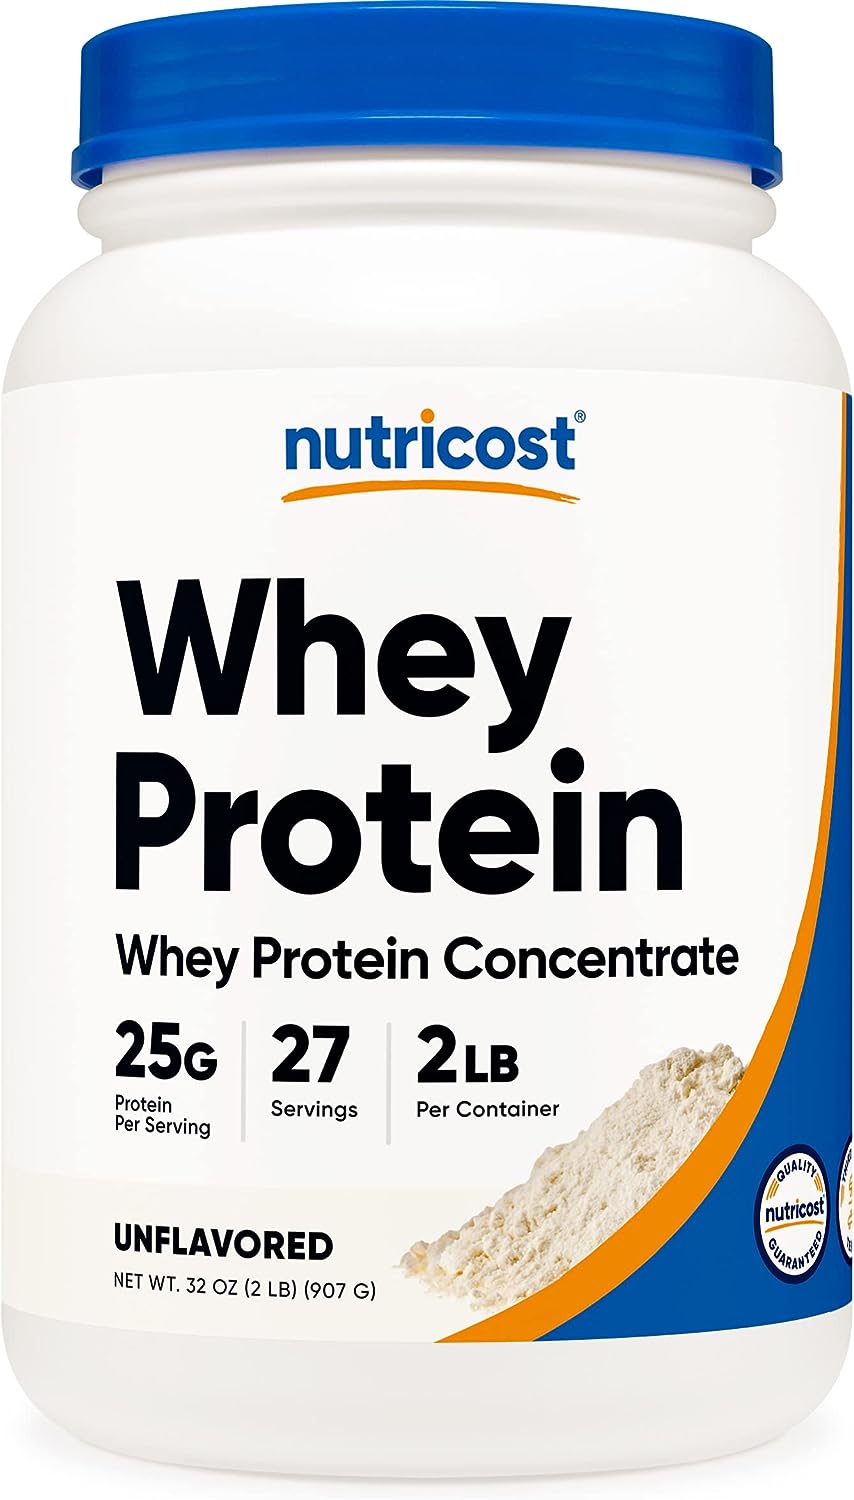 Nutricost Whey Protein Concentrate (Unflavored) 2LBS - Gluten Free & N